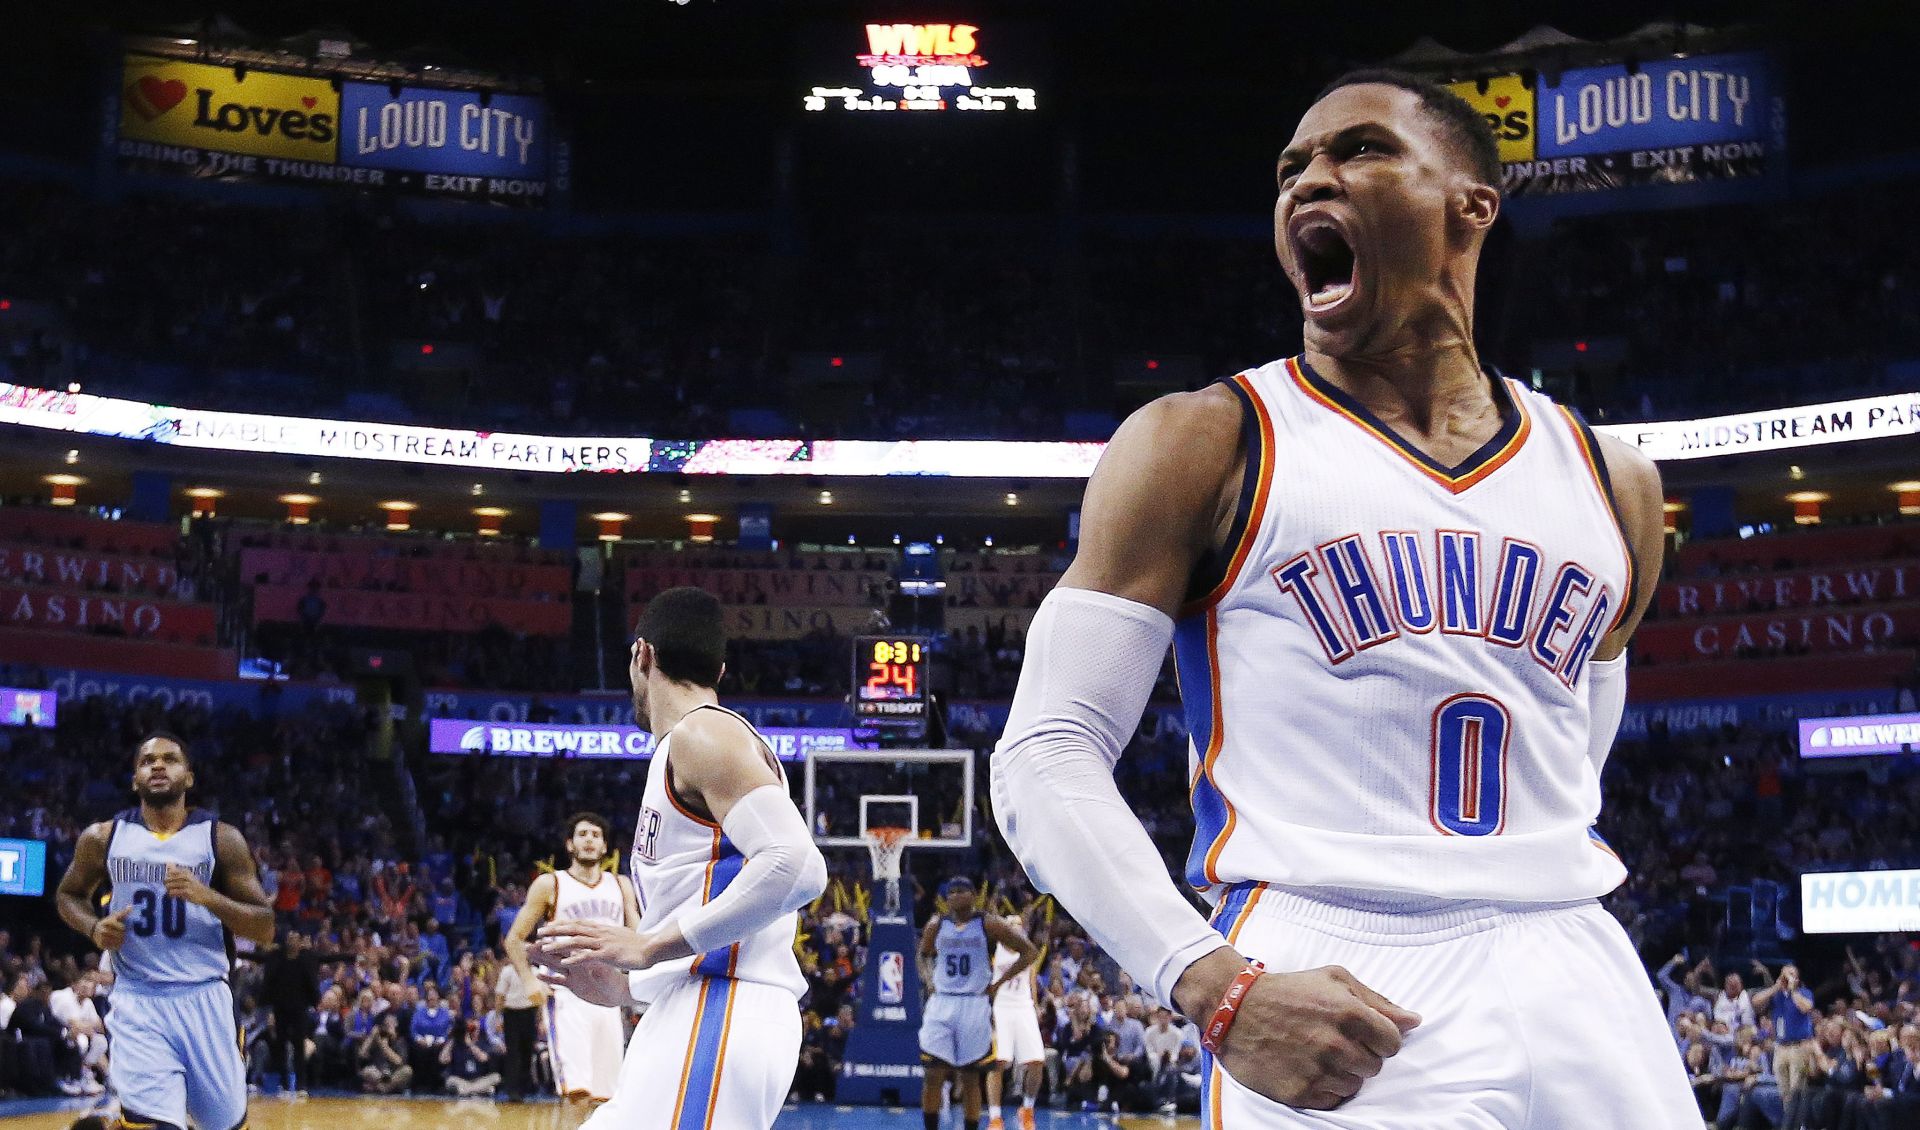 epa05711964 Oklahoma City Thunder guard Russell Westbrook (R) reacts after dunking the ball  in the second half of the NBA basketball game between the Memphis Grizzlies and the Oklahoma City Thunder at the Chesapeake Energy Arena in Oklahoma City, Oklahoma, USA, 11 January 2017.  EPA/LARRY W. SMITH